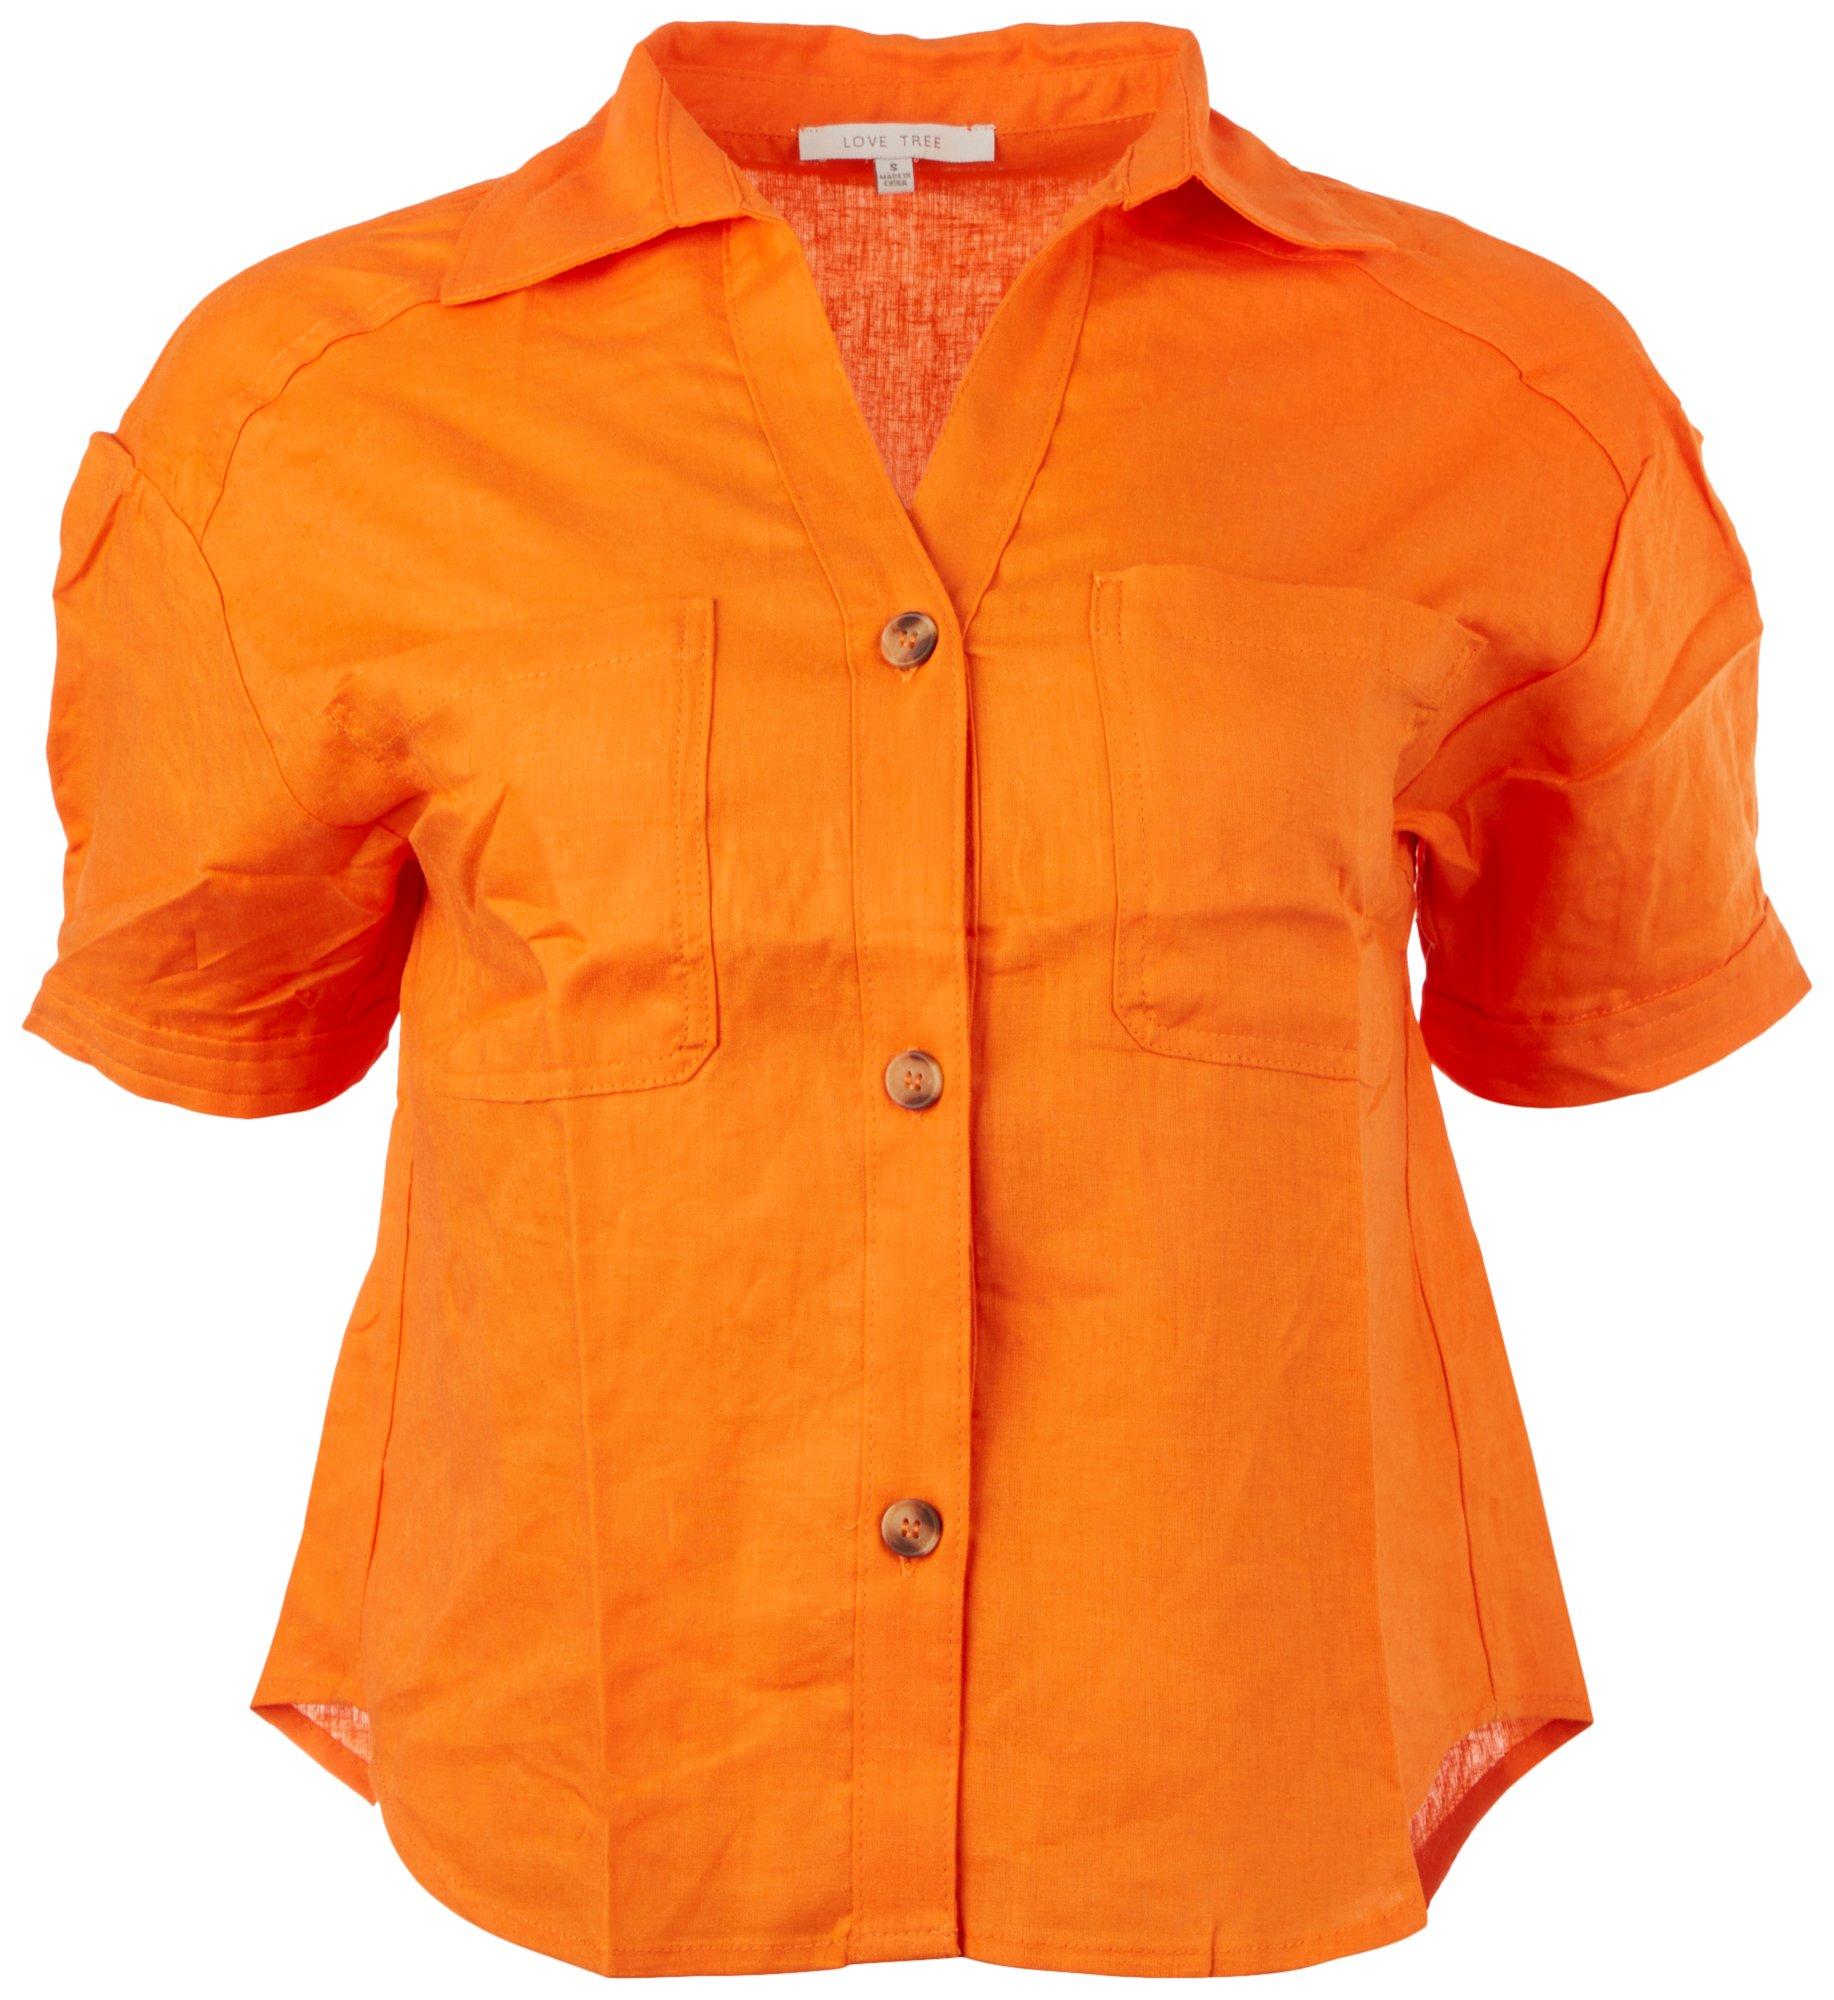 Juniors Solid Button Down Short Sleeve Top